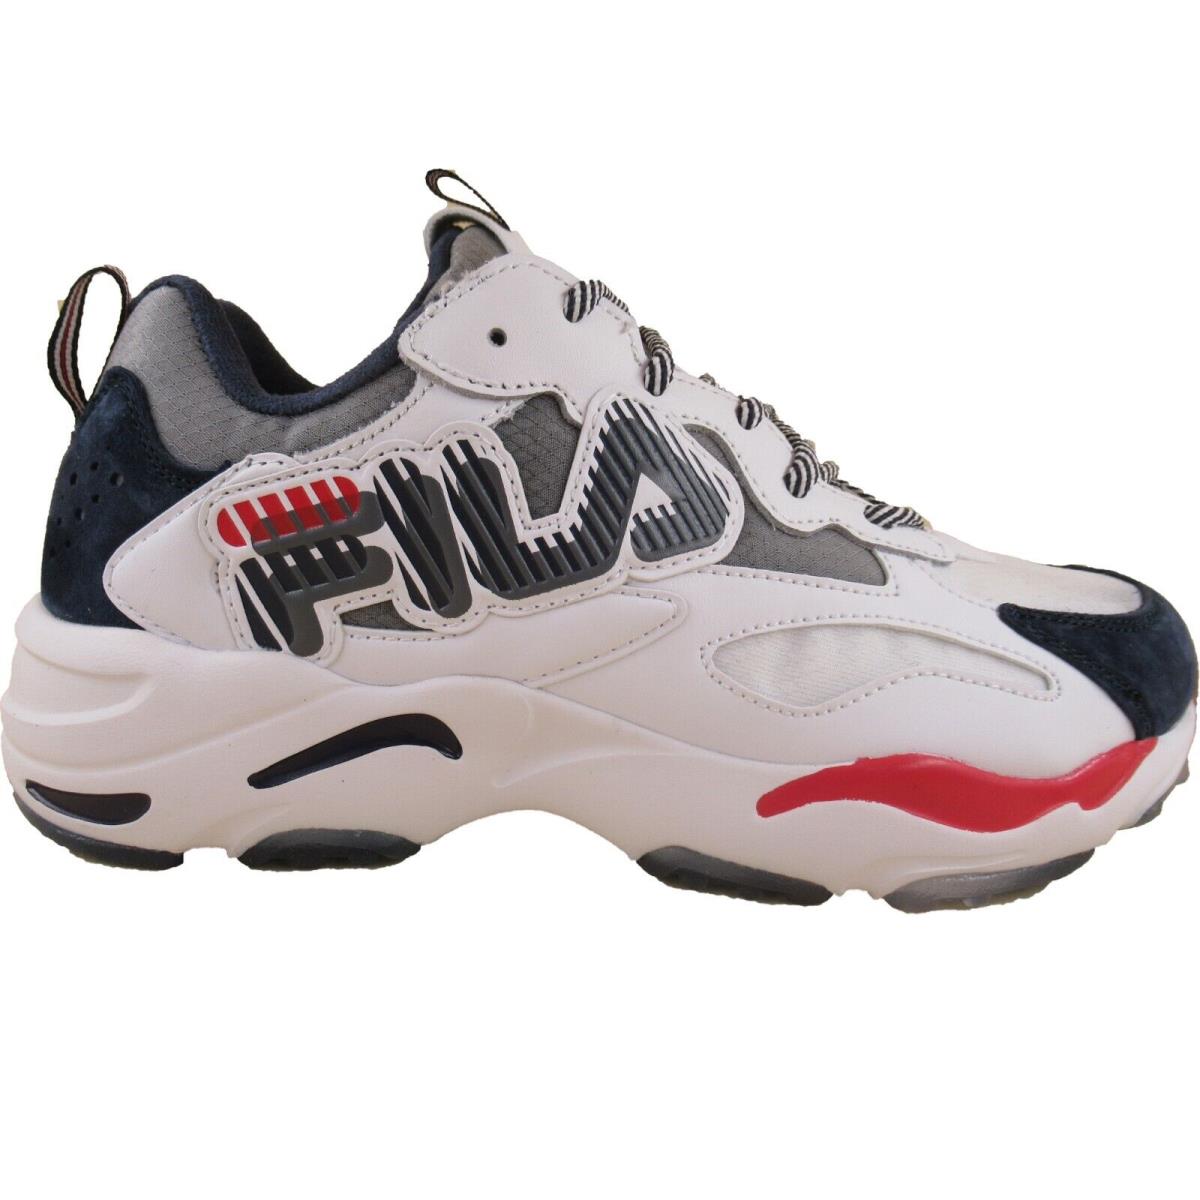 Fila Men`s Ray Tracer Graphic 1RM00807 Casual Shoes Size 8 - White, Navy, Red